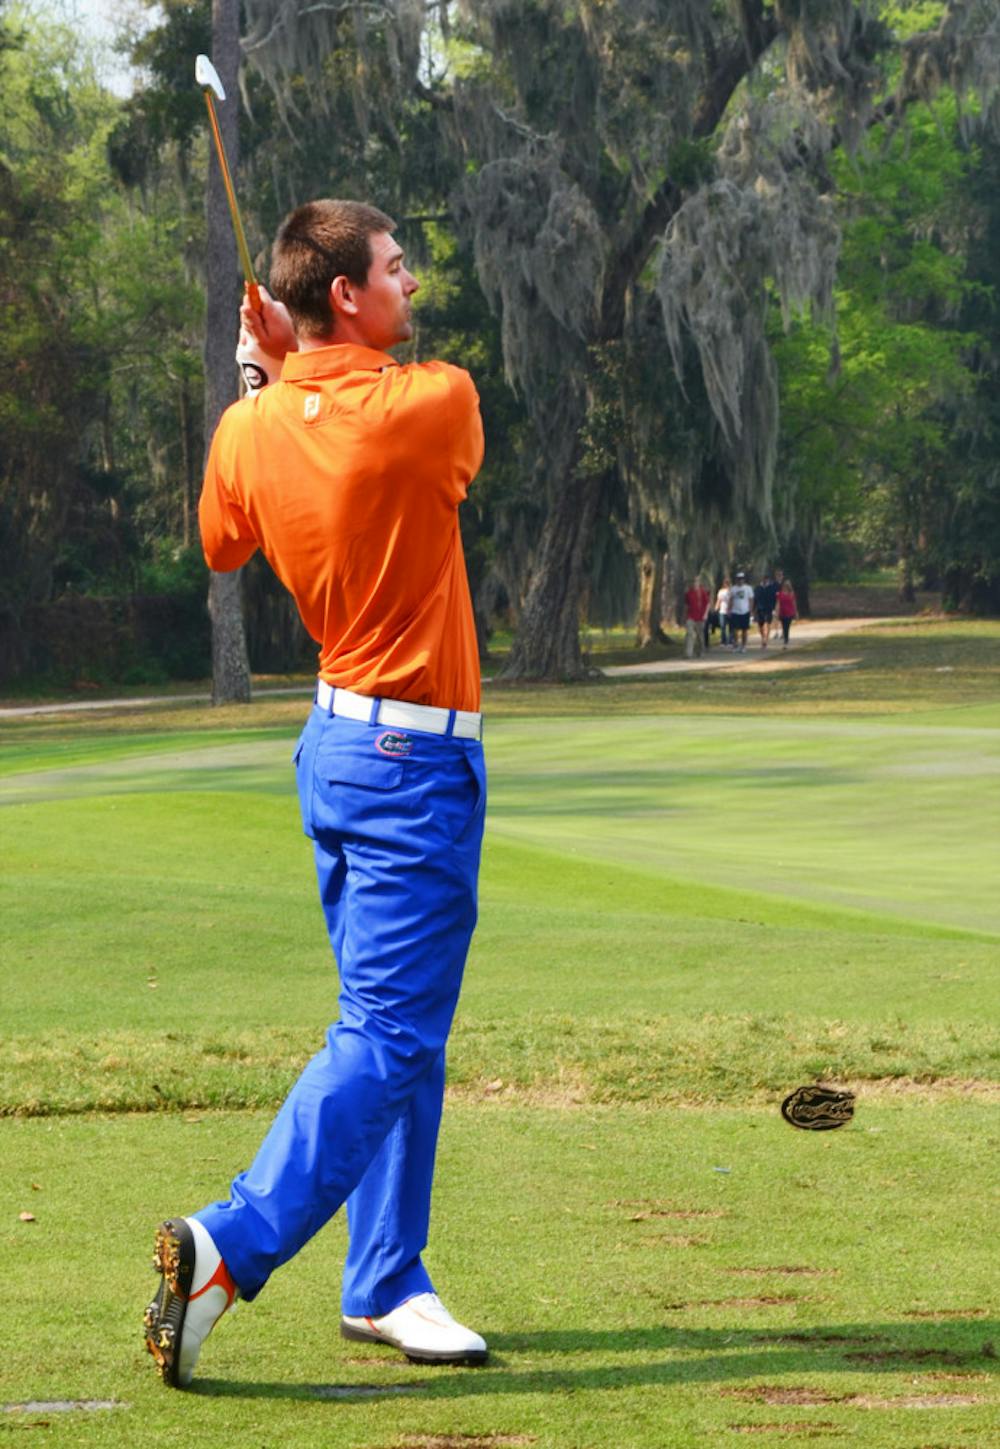 <p align="justify">Senior T.J. Vogel eyes his shot during the SunTrust Gator Invitational at Mark Bostick Golf Course on Sunday. Vogel is back with the Gators after competing in The Masters.</p>